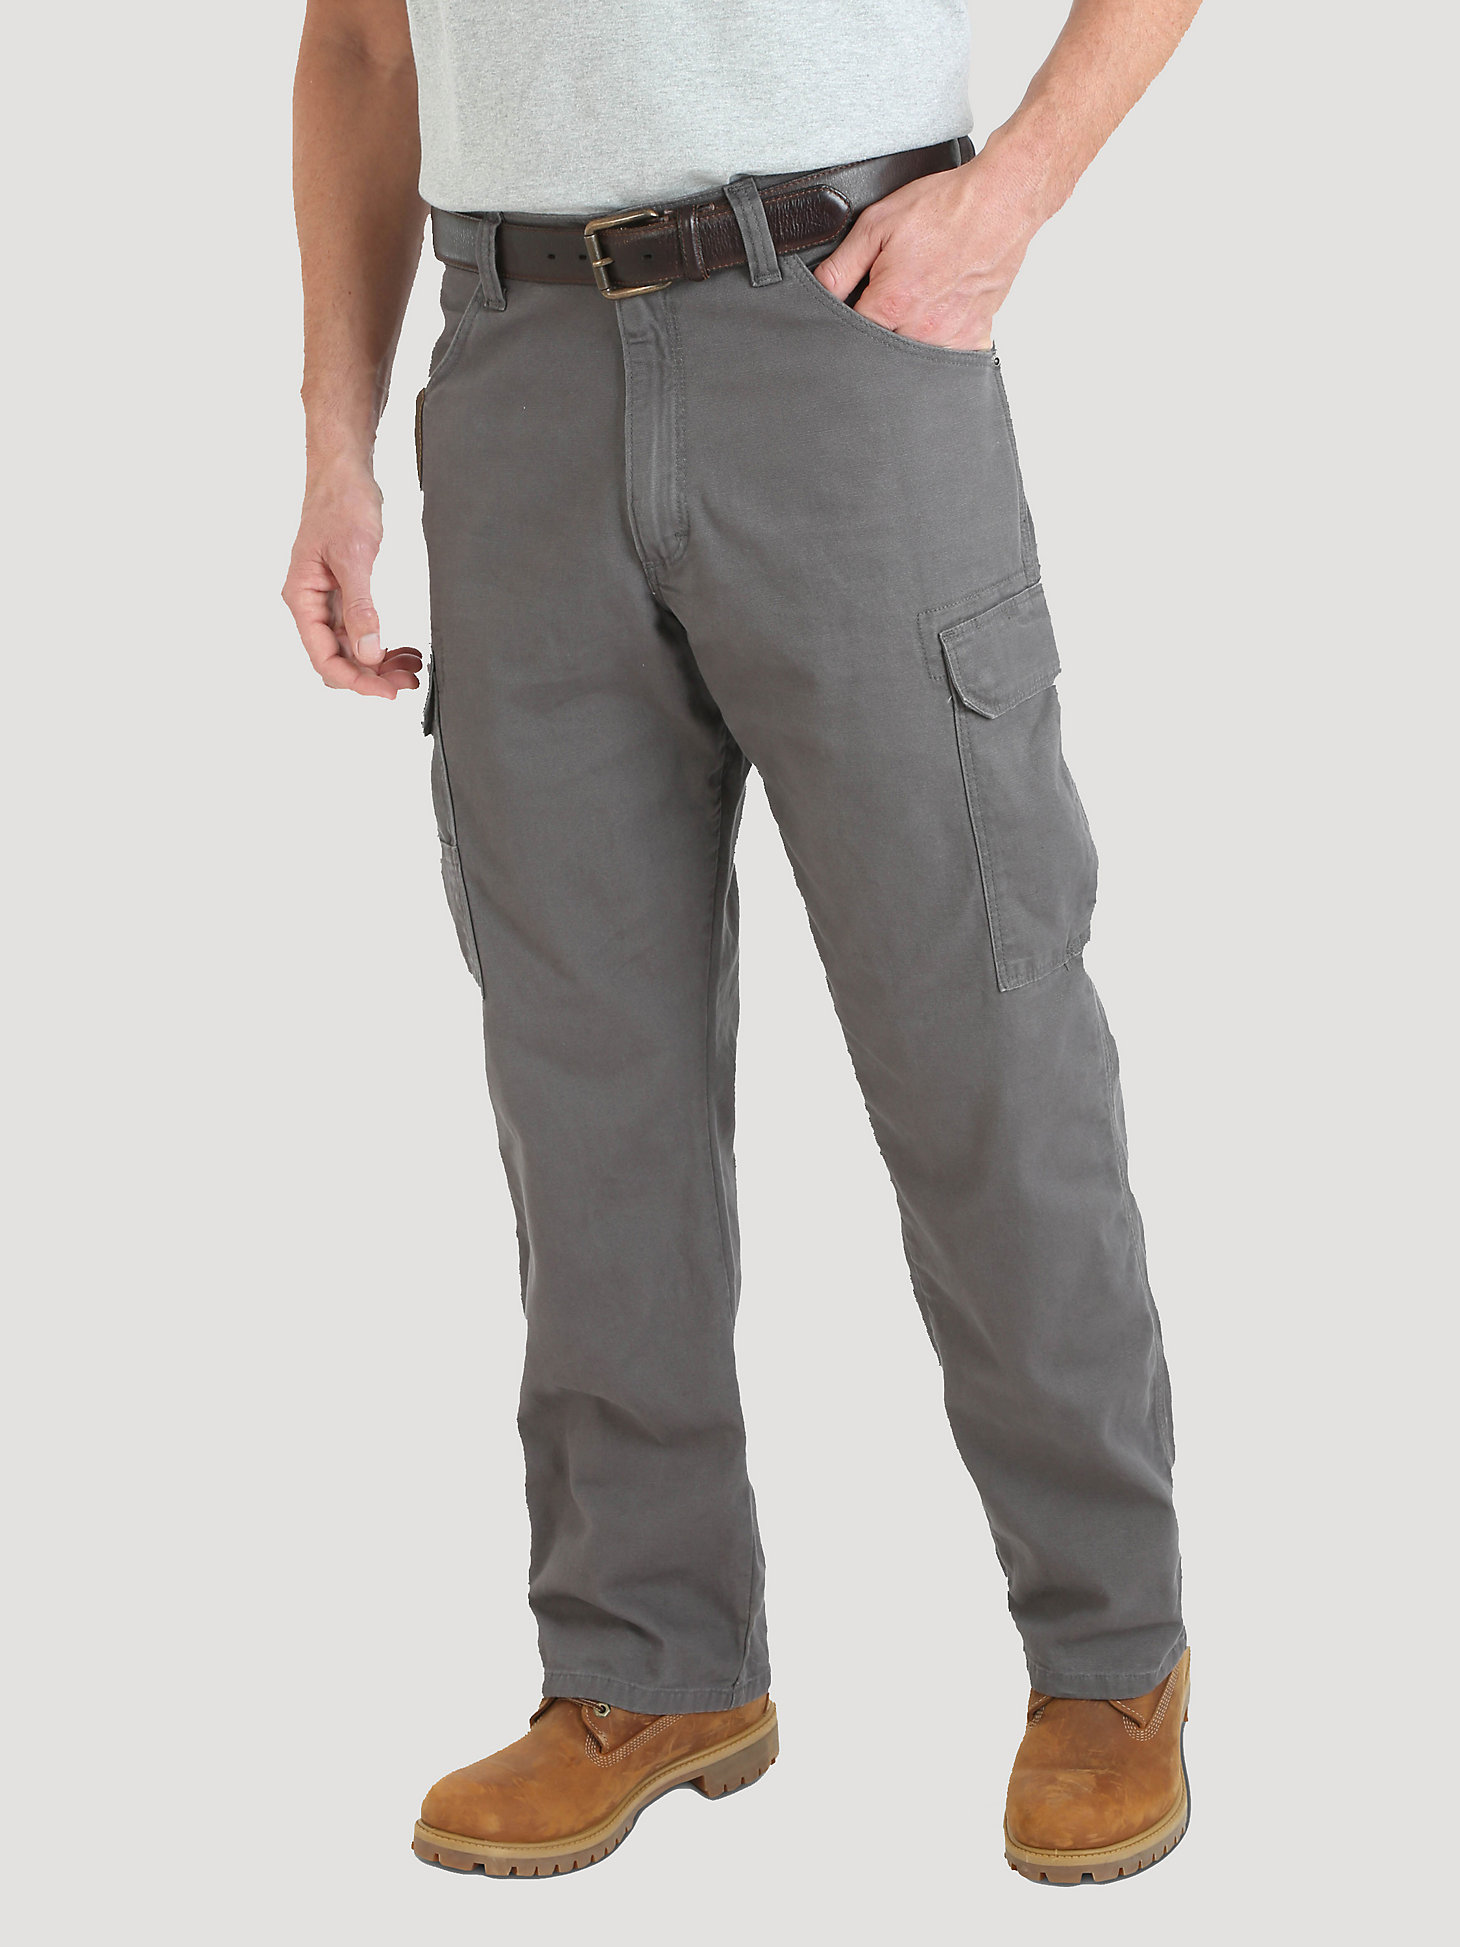 Wrangler® RIGGS Workwear® Advanced Comfort Lightweight Ranger Pant in Charcoal main view